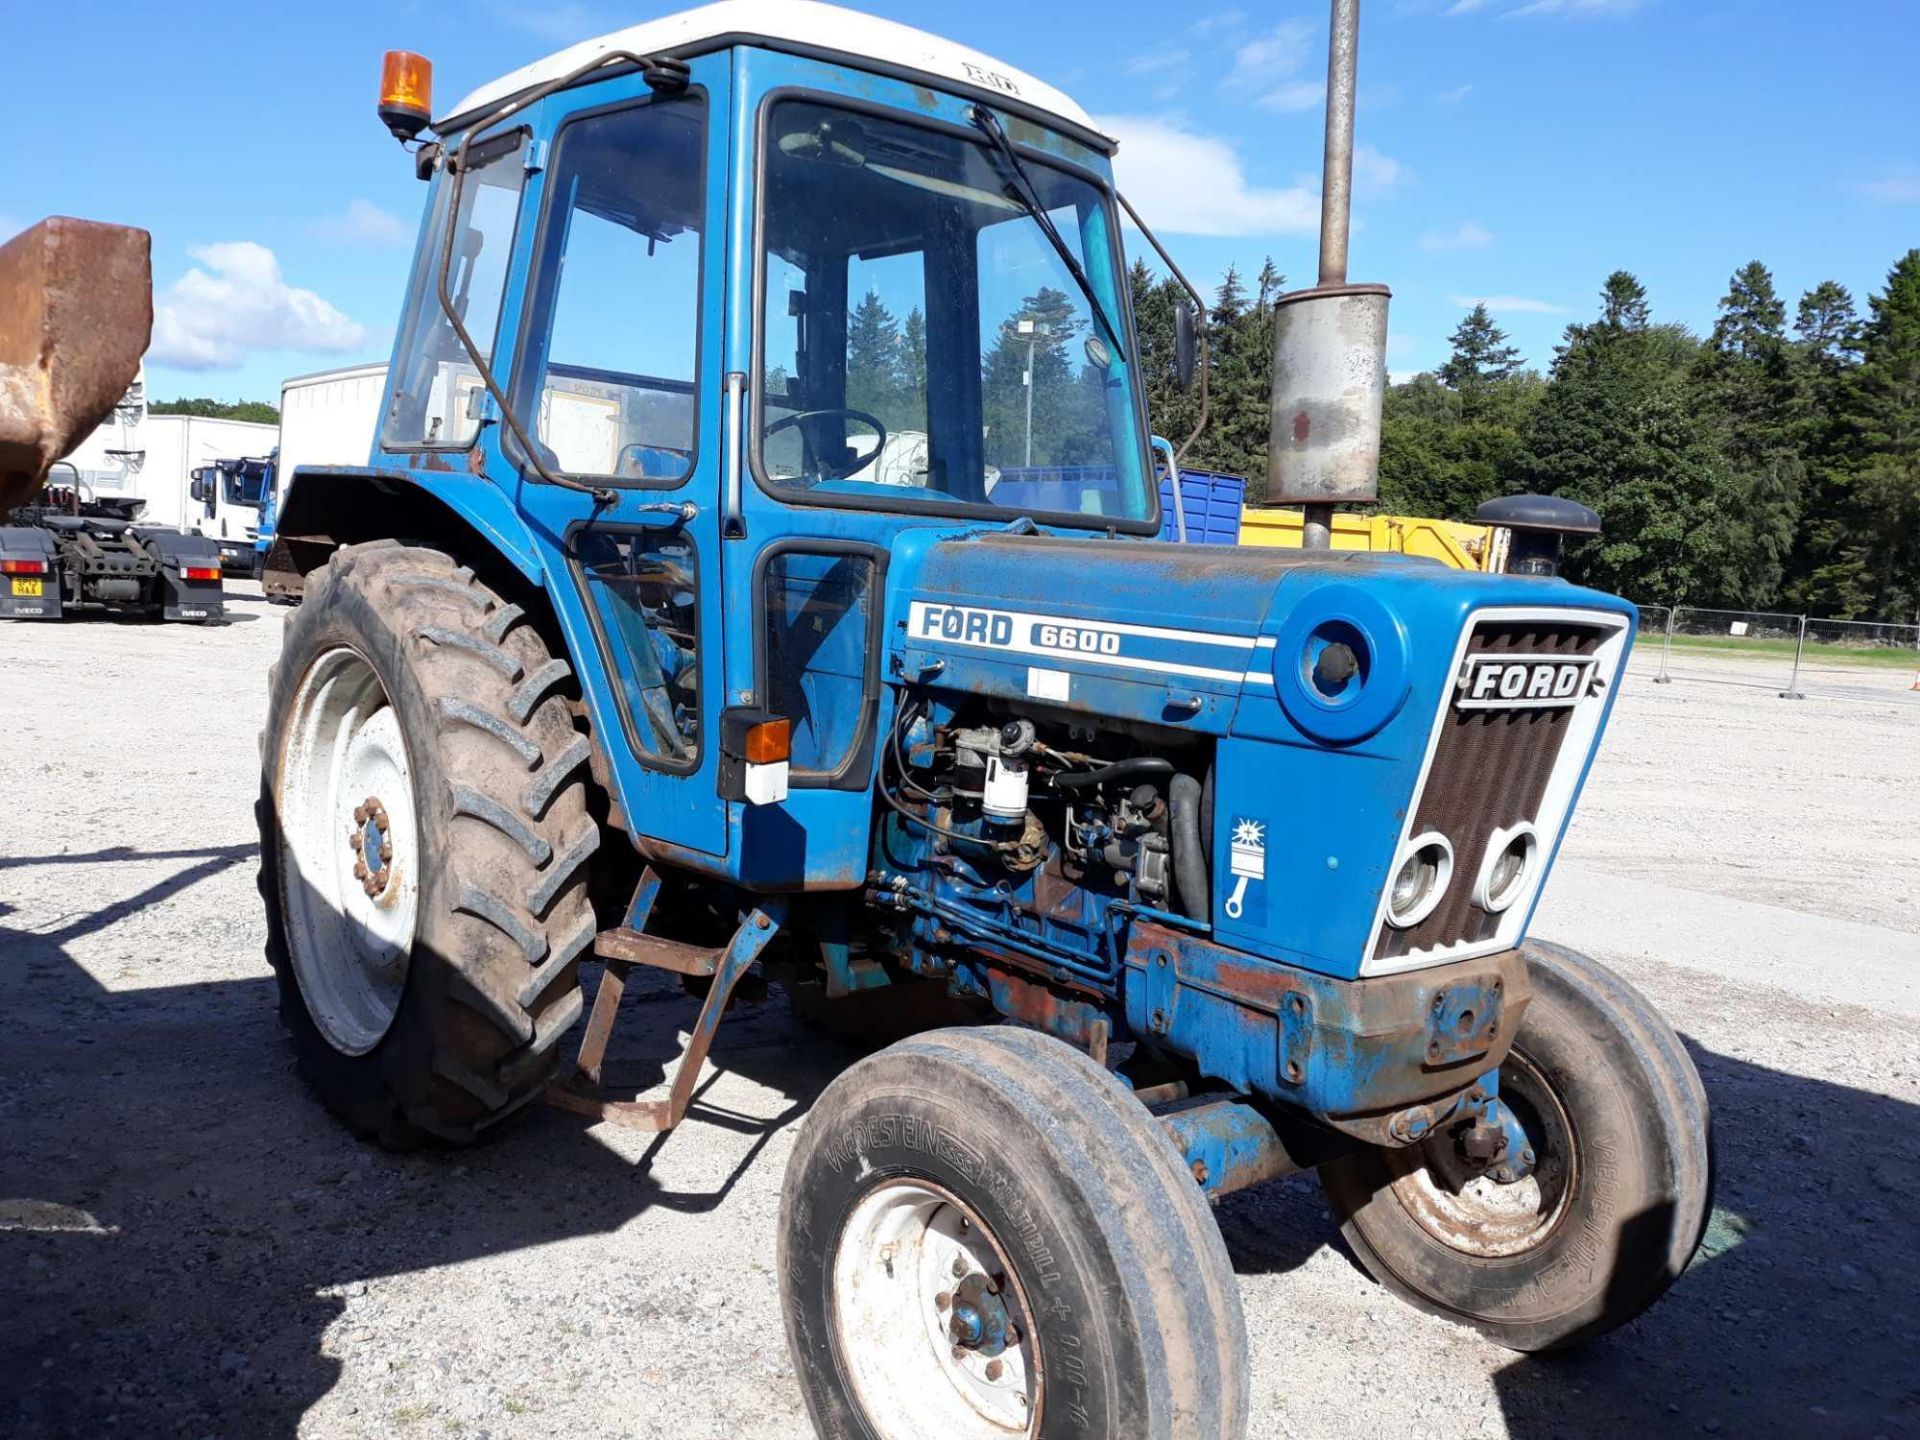 Ford Cargo 1615 - 0cc Tractor - Image 5 of 8